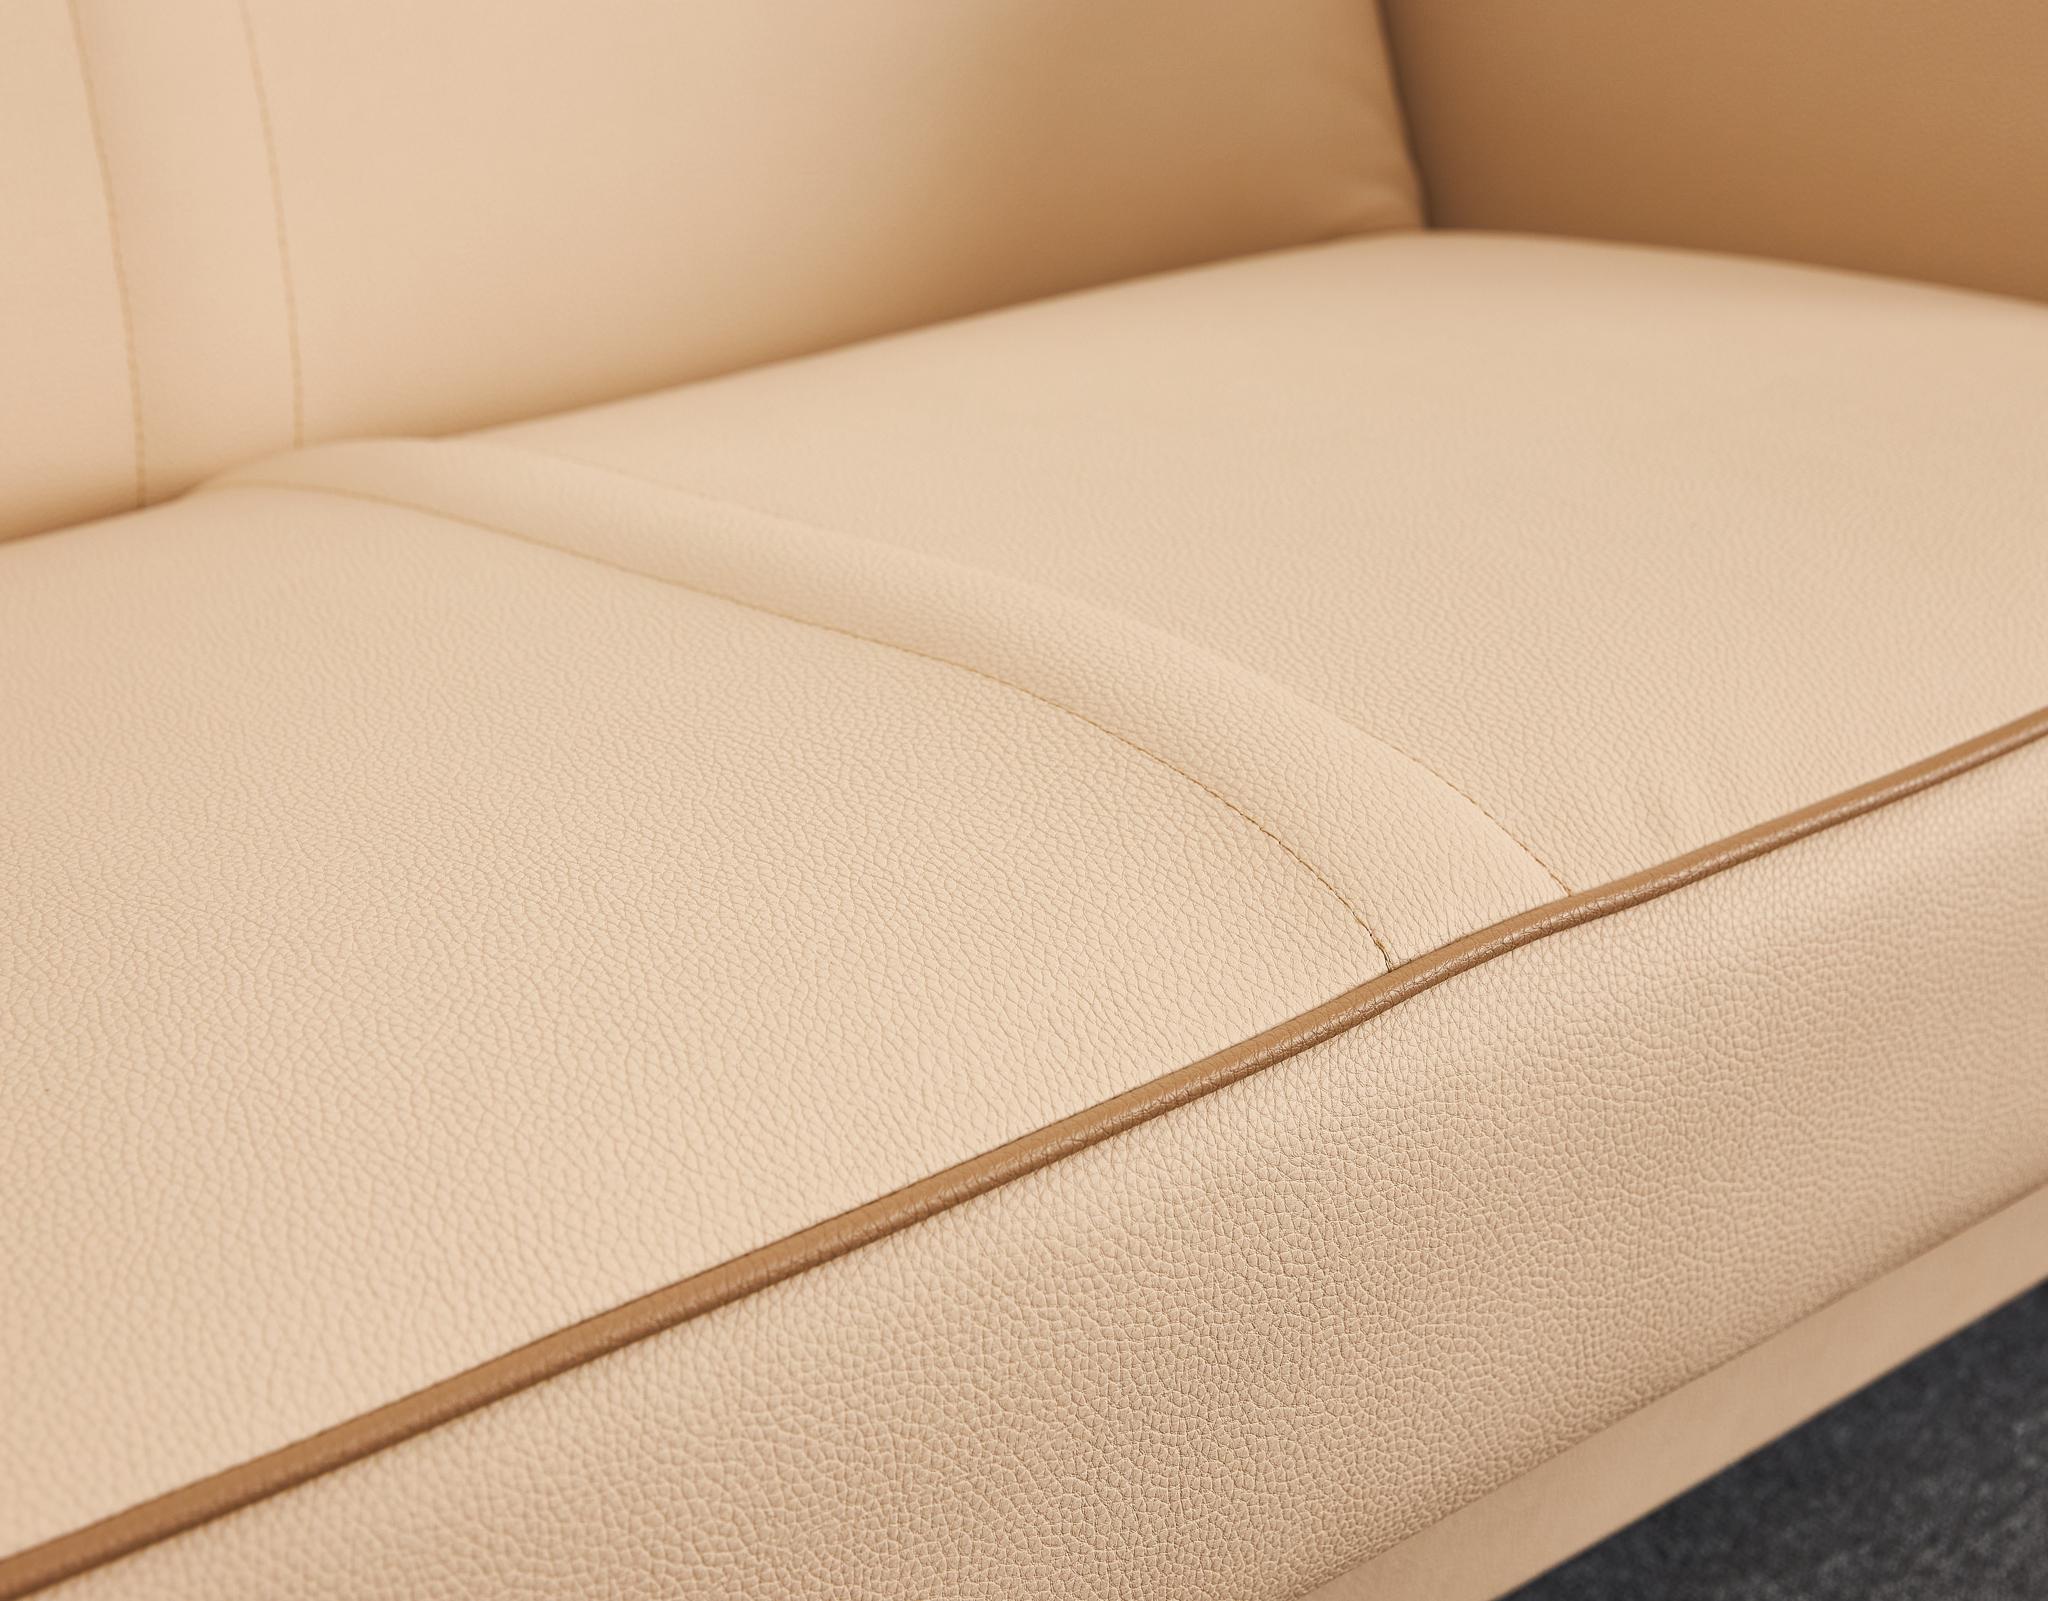 Oiled Jindrich Halabala Catalogue Piece, Beige Vegan Leather Sofa-Bed H-363 For Sale